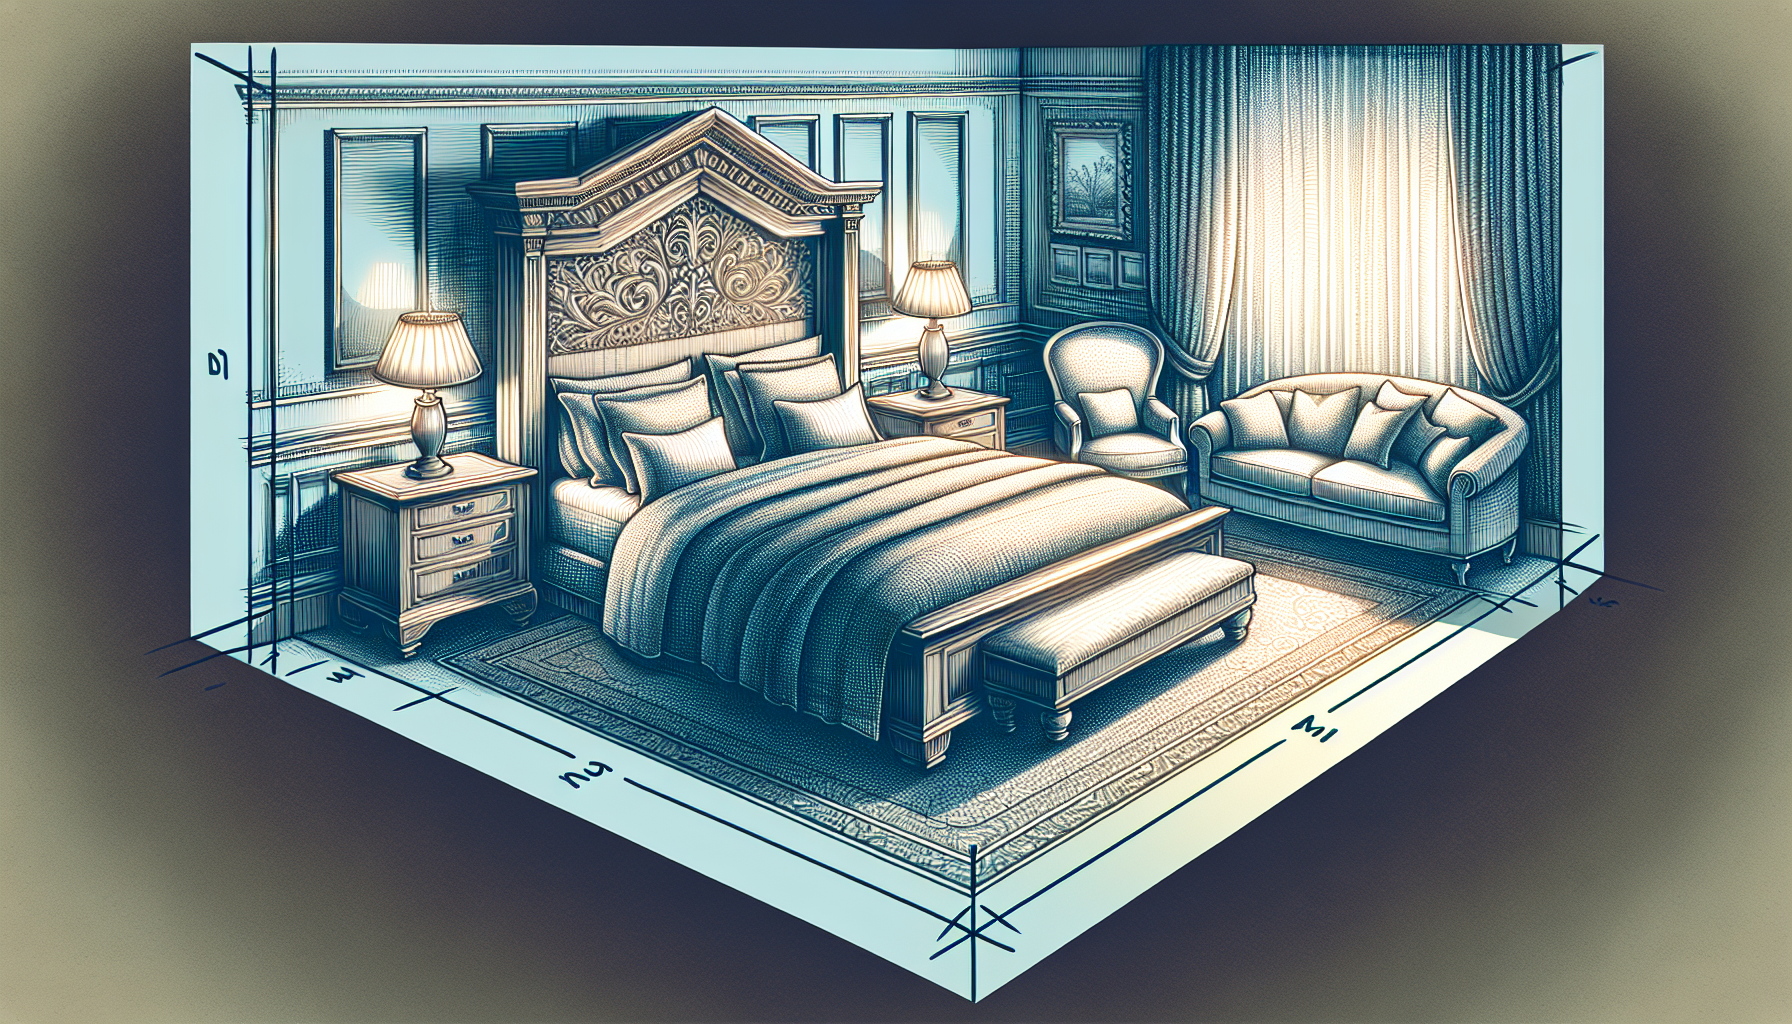 Illustration of bedroom layout with headboard